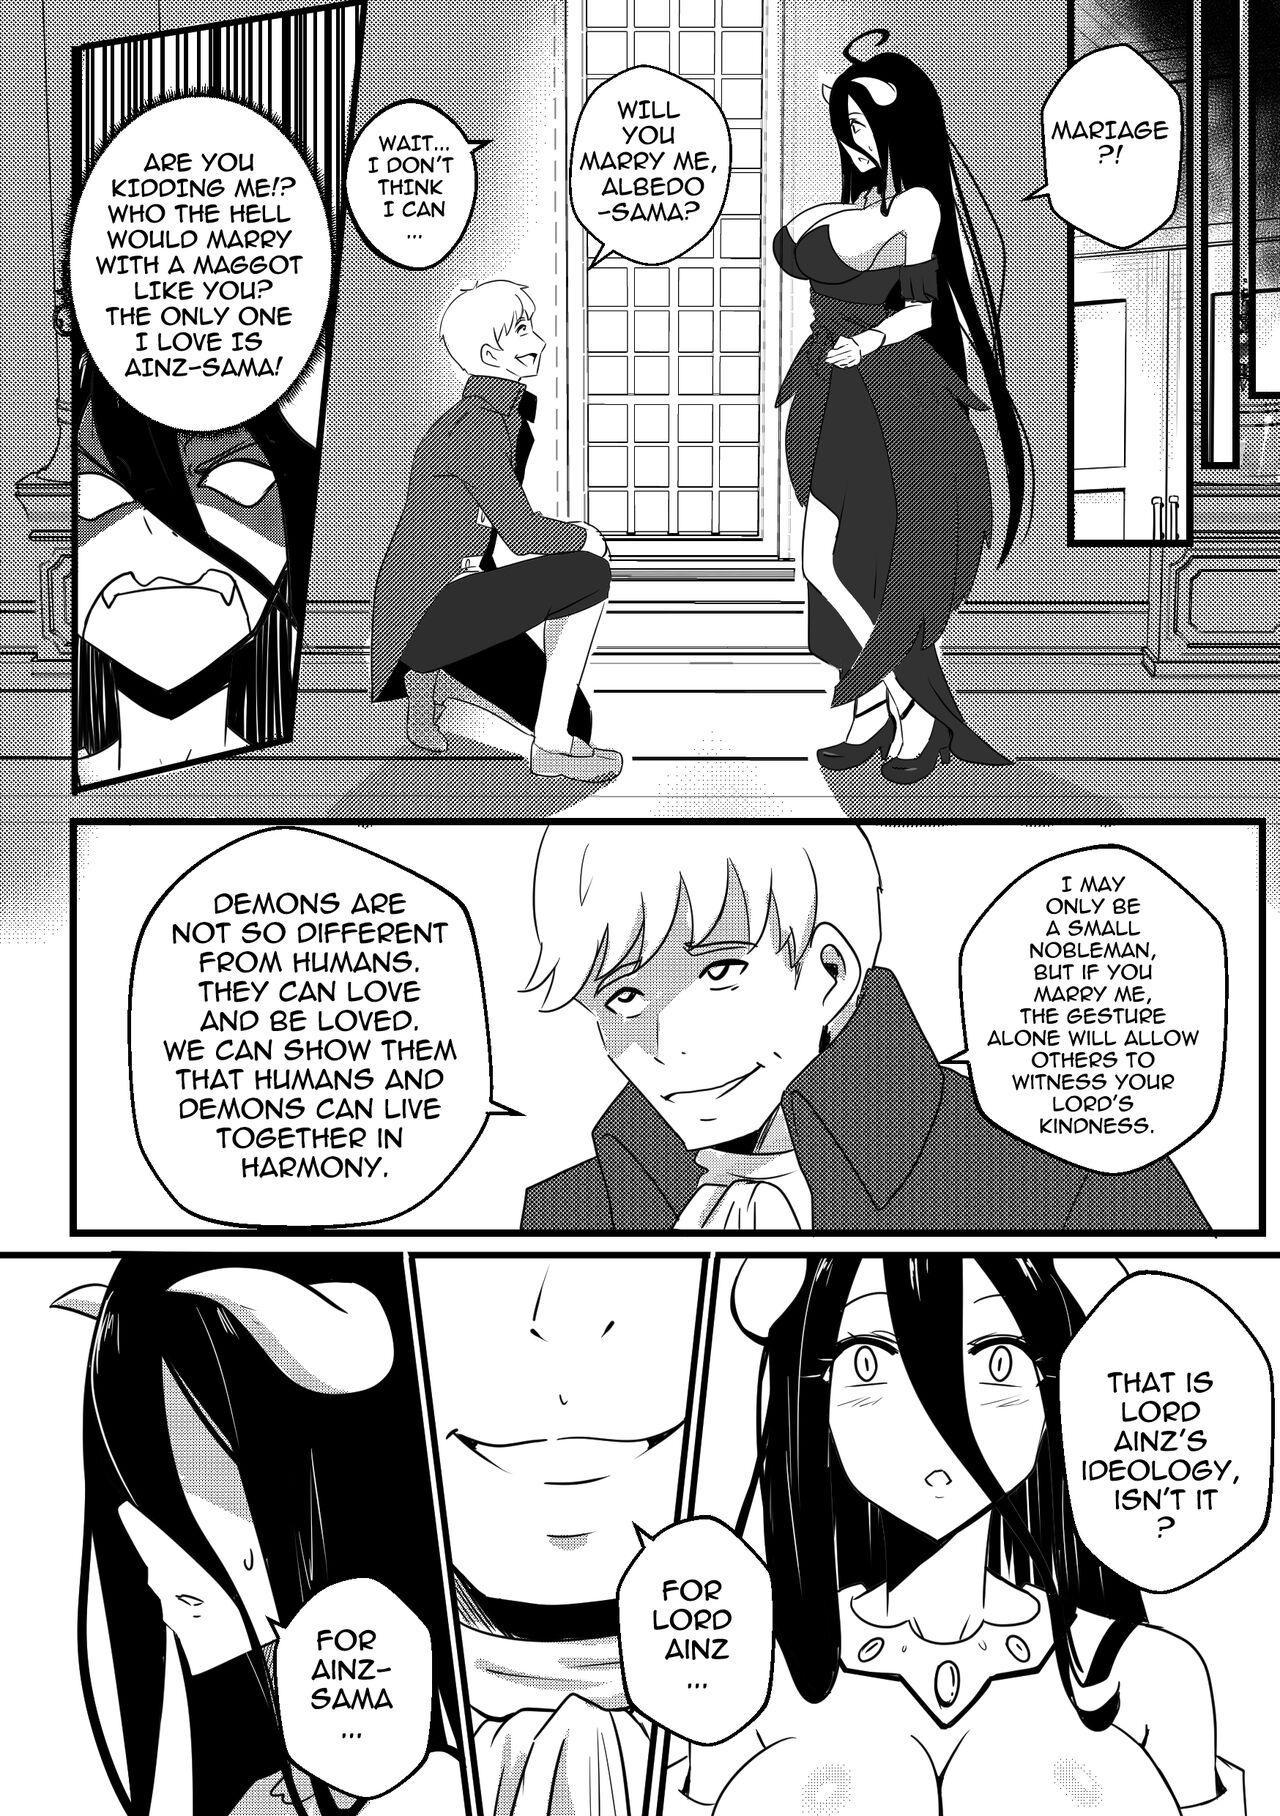 Stepbrother [Merkonig] B-Trayal 40 Albedo (Overlord) Censored [English] - Overlord Blowing - Page 3